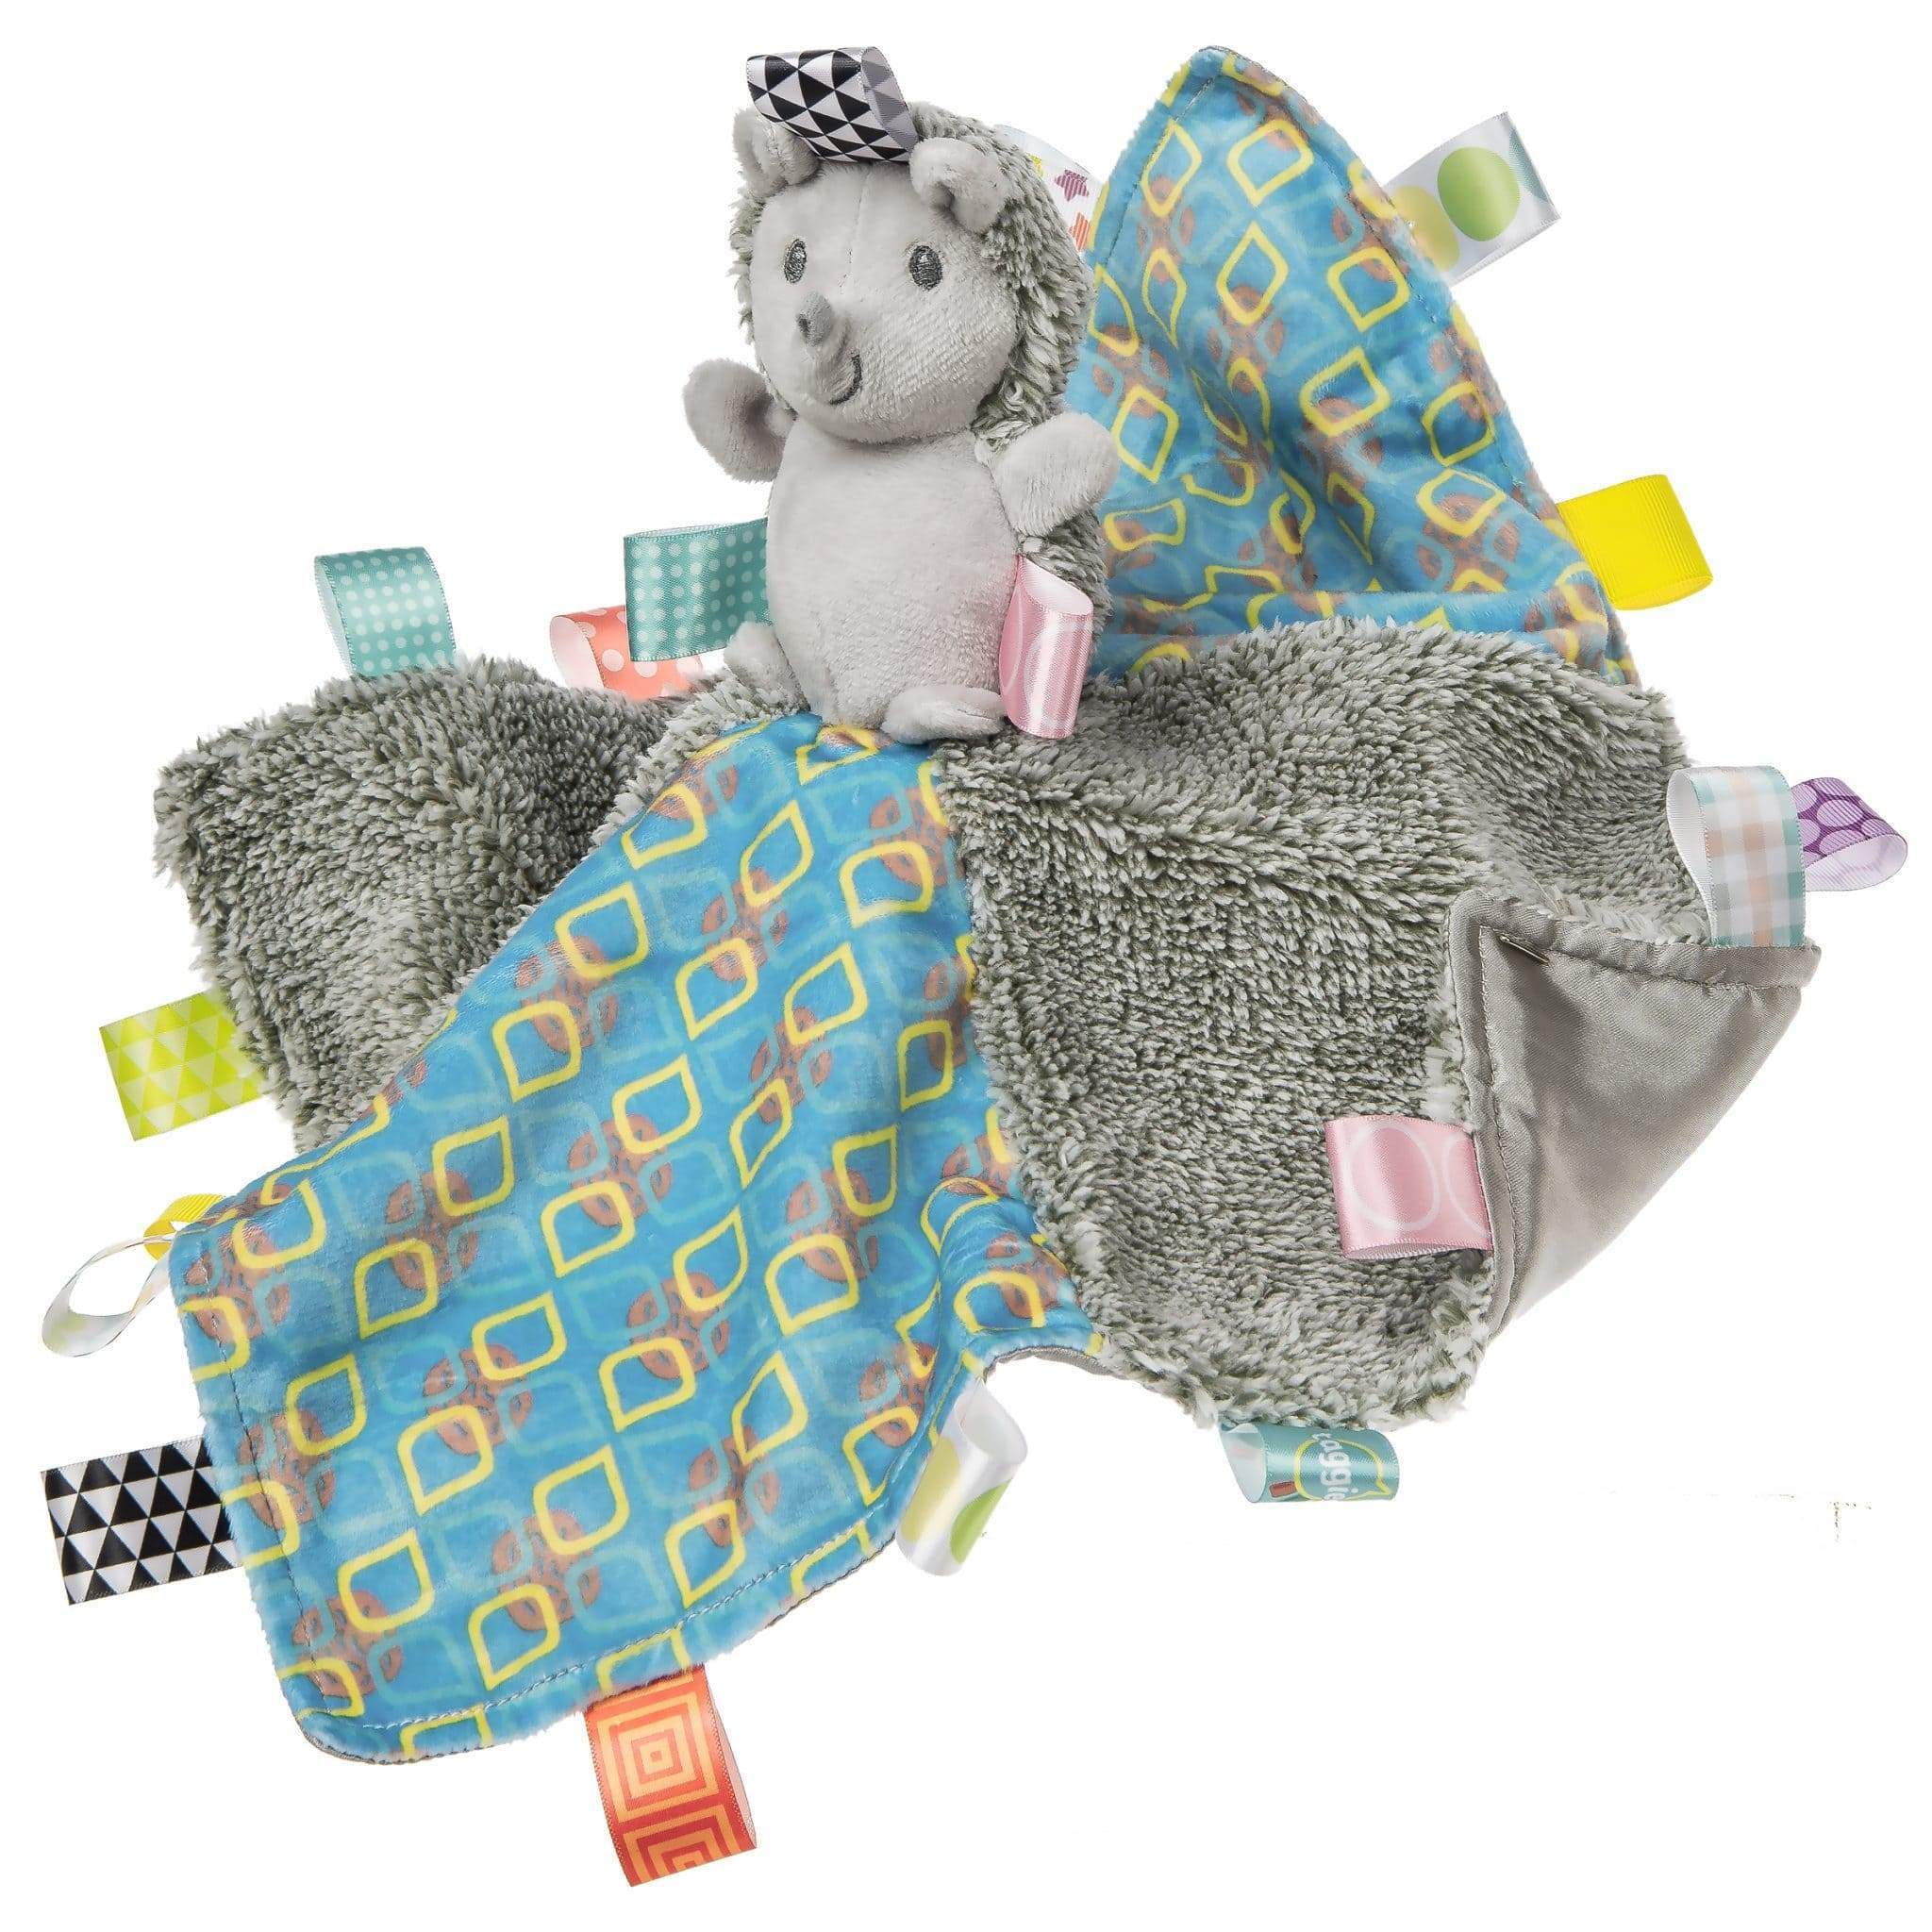 Taggies Heather Hedgehog Character Comforter Blanket by Mary Meyer - Bumbles & Boo